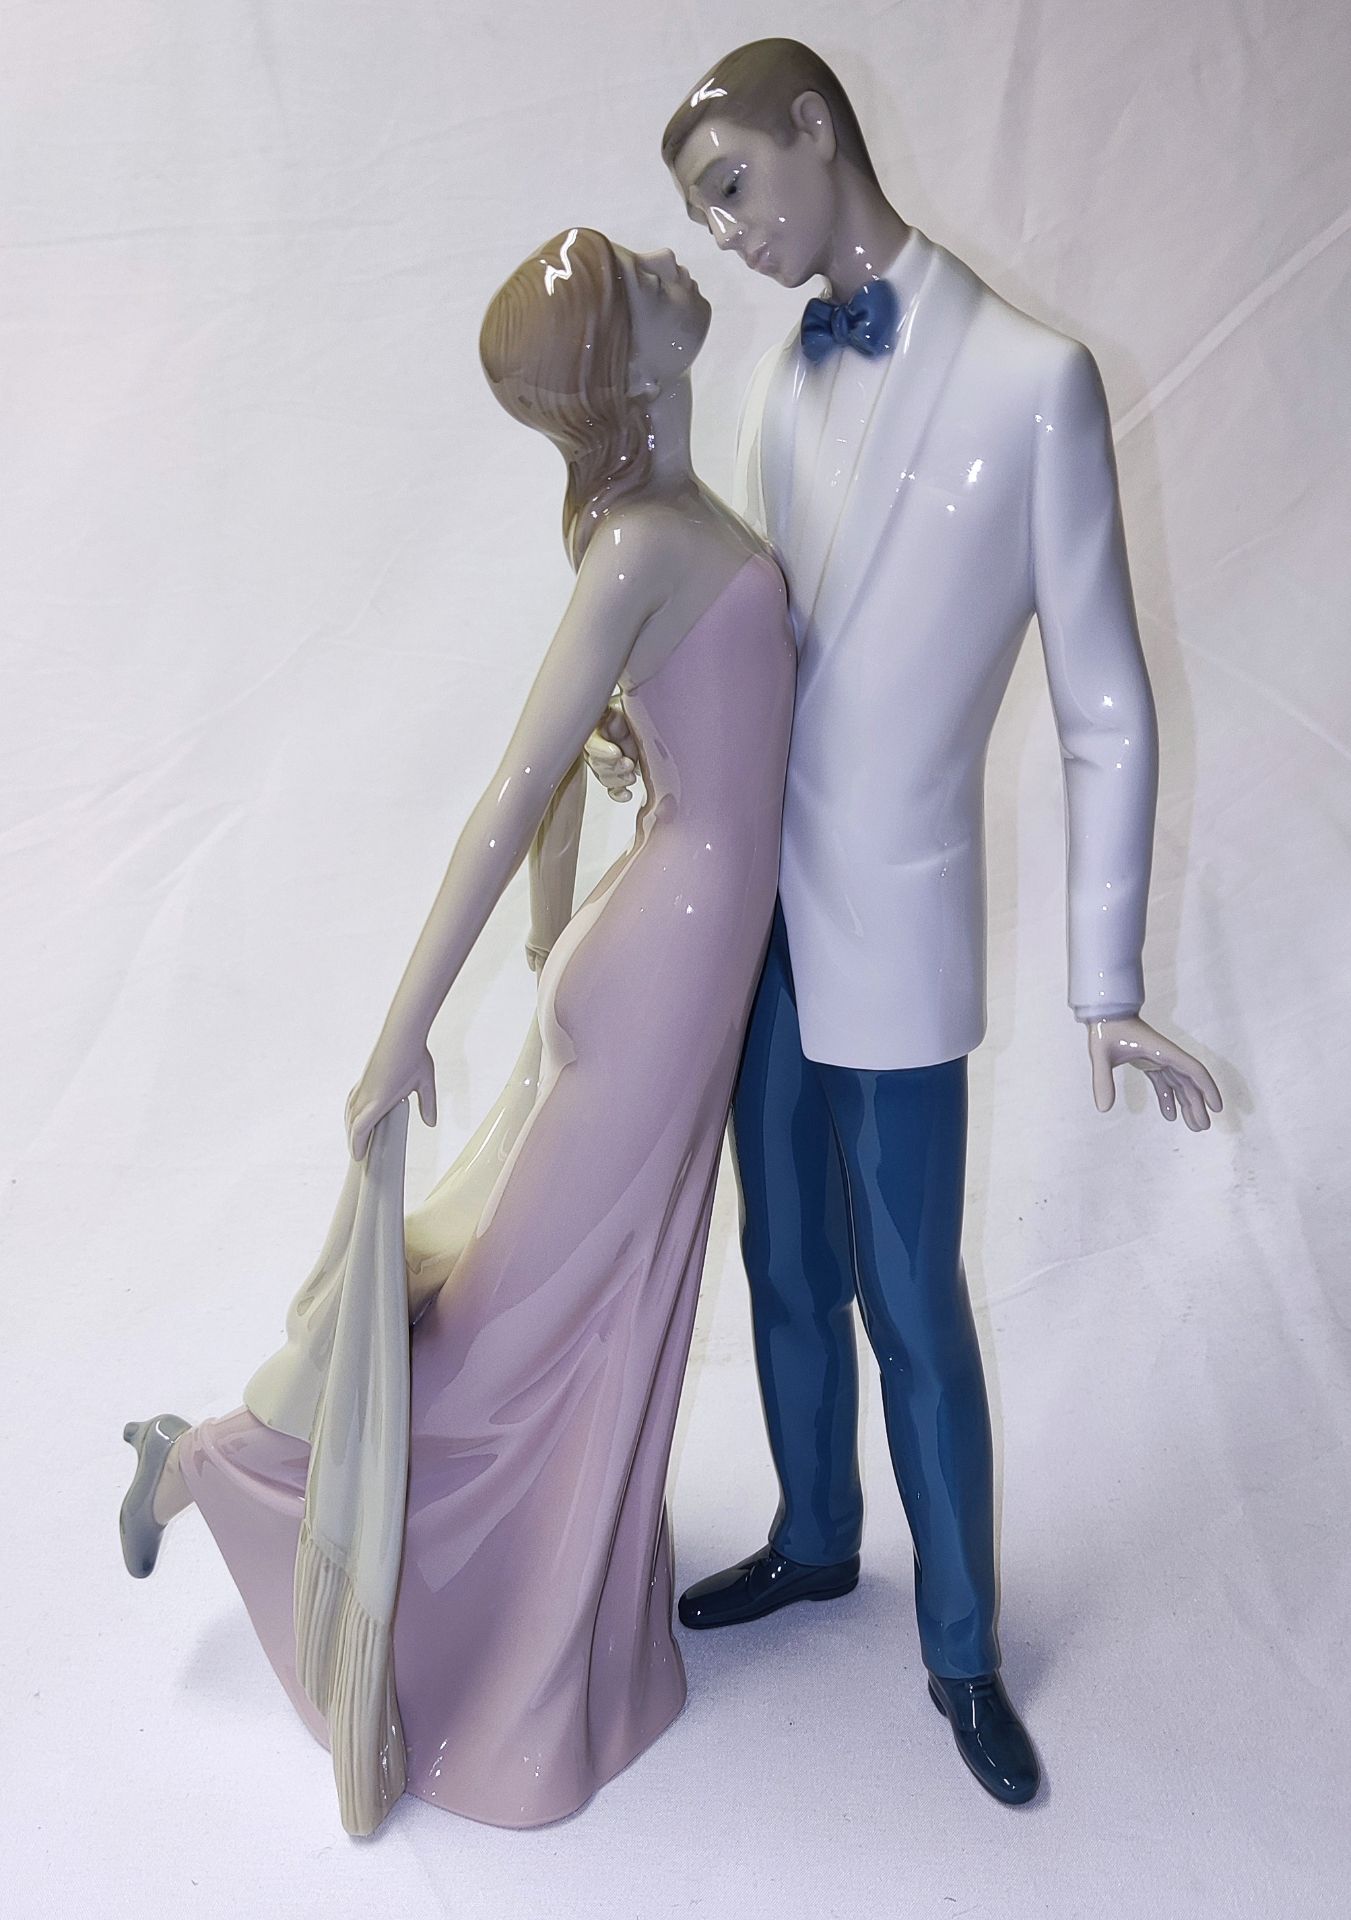 1 x LLADRO Happy Anniversary Porcelain Statue - New/Boxed - RRP £520.00 - Ref: /HOC232/HC5 - CL987 - - Image 9 of 25